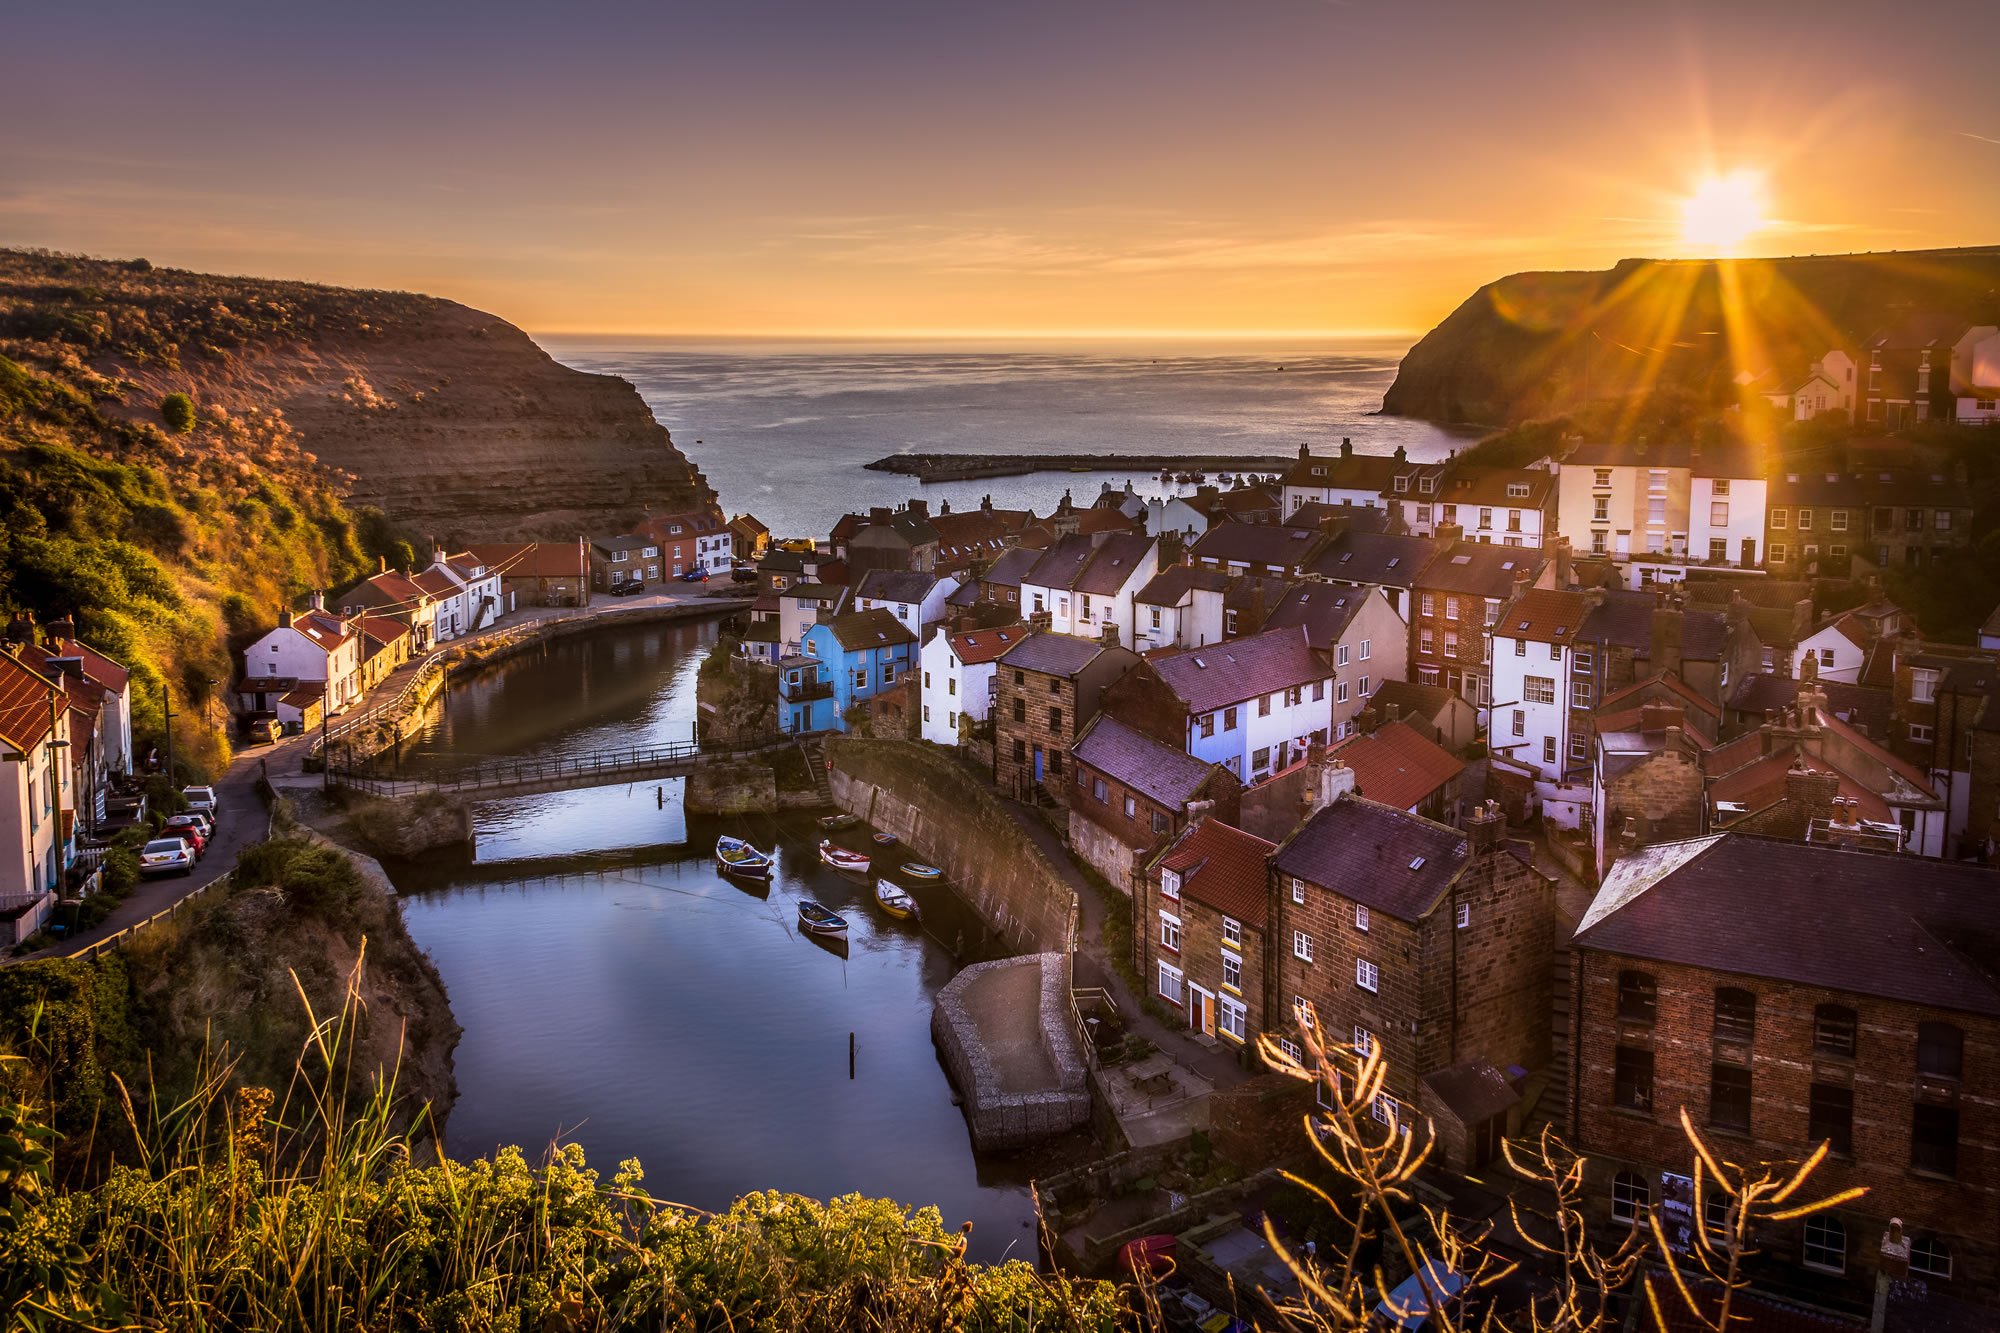 Image name staithes landing page brian smith the 17 image from the post Staithes in Yorkshire.com.